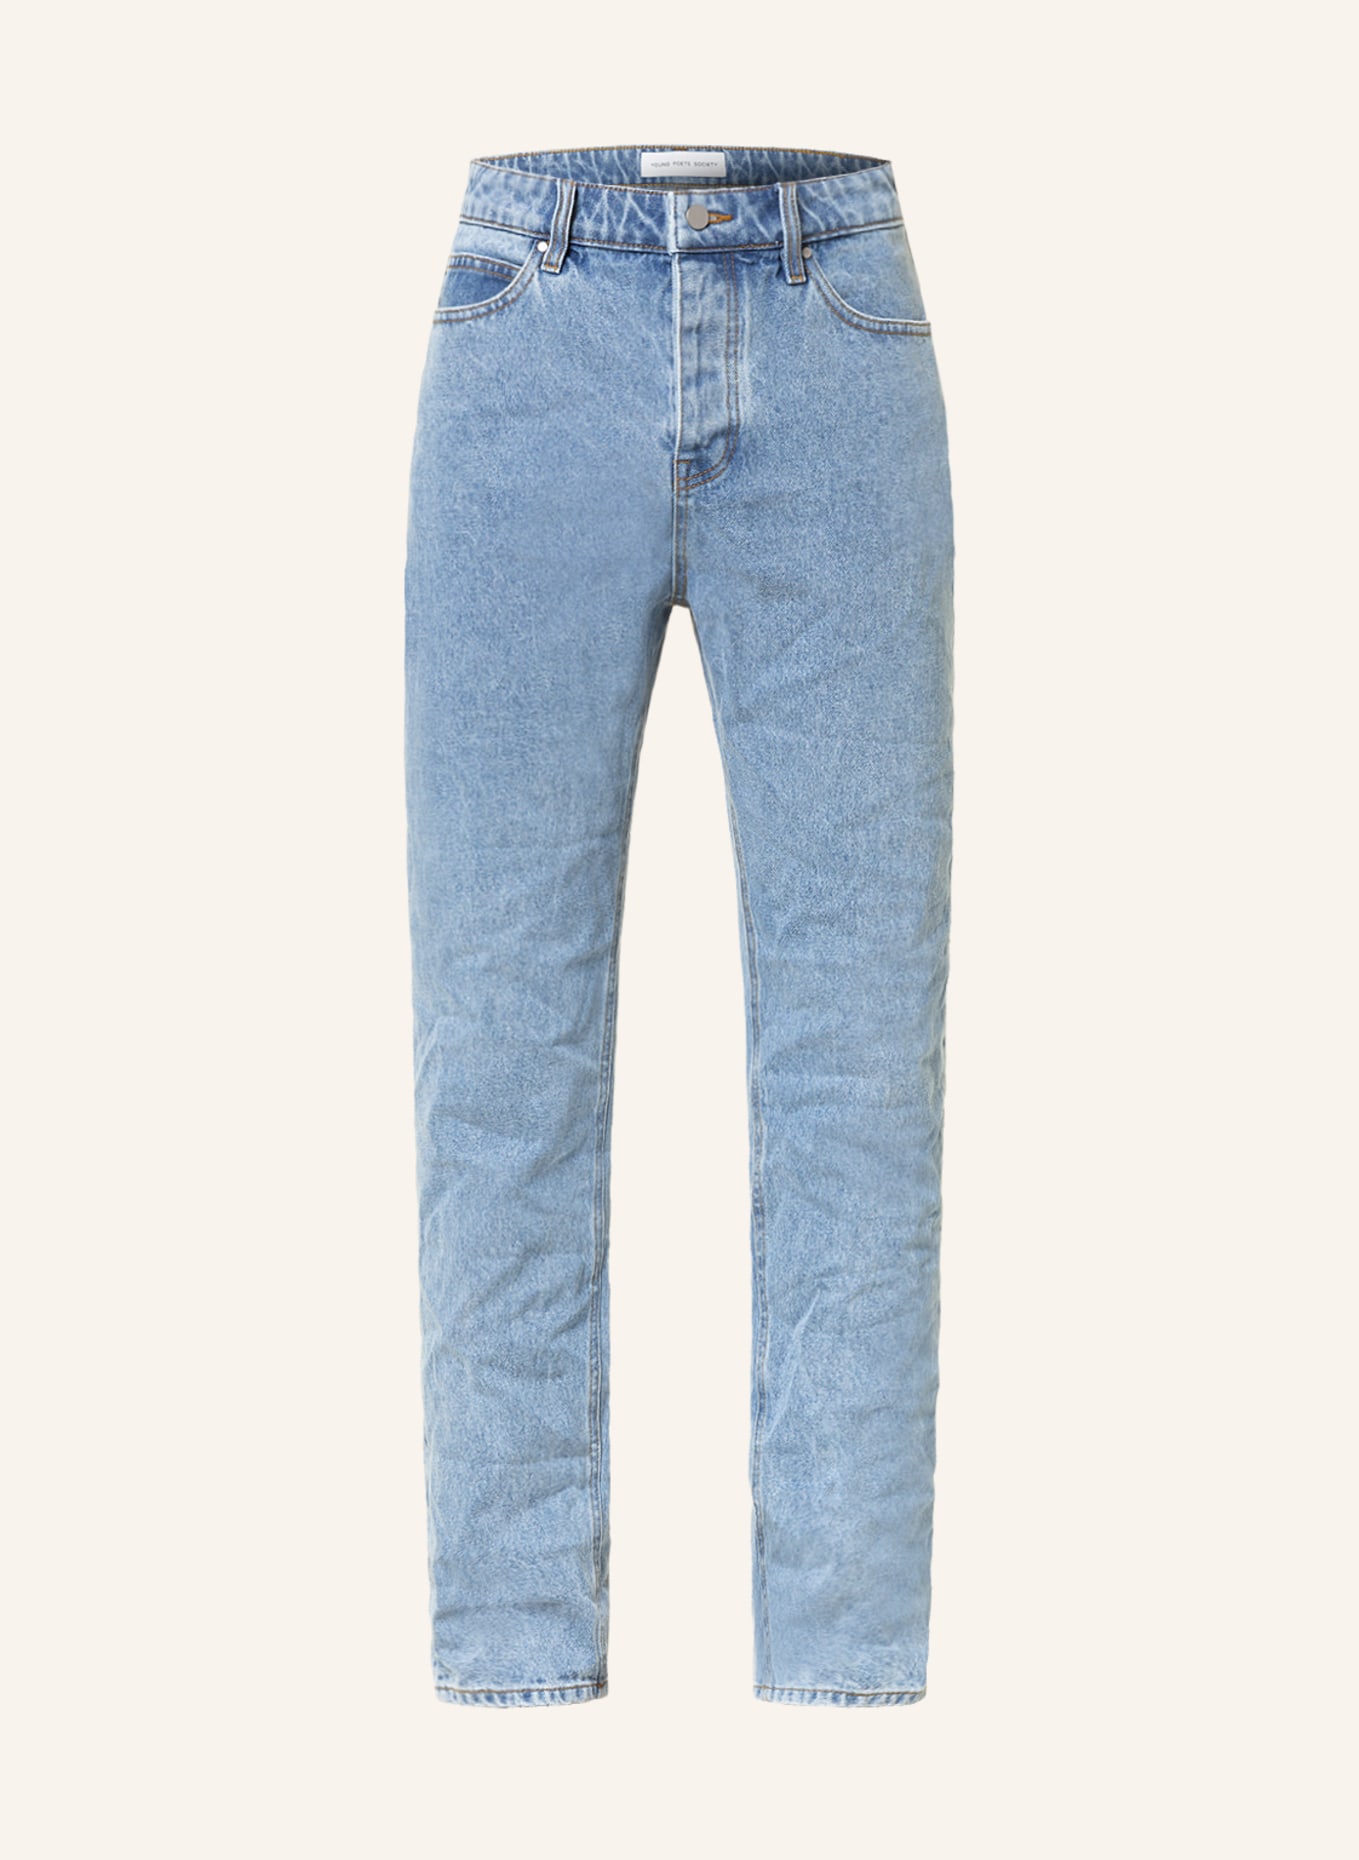 YOUNG POETS Jeans COLE 1001 Regular Fit, Farbe: 522 Mid Blue (Bild 1)